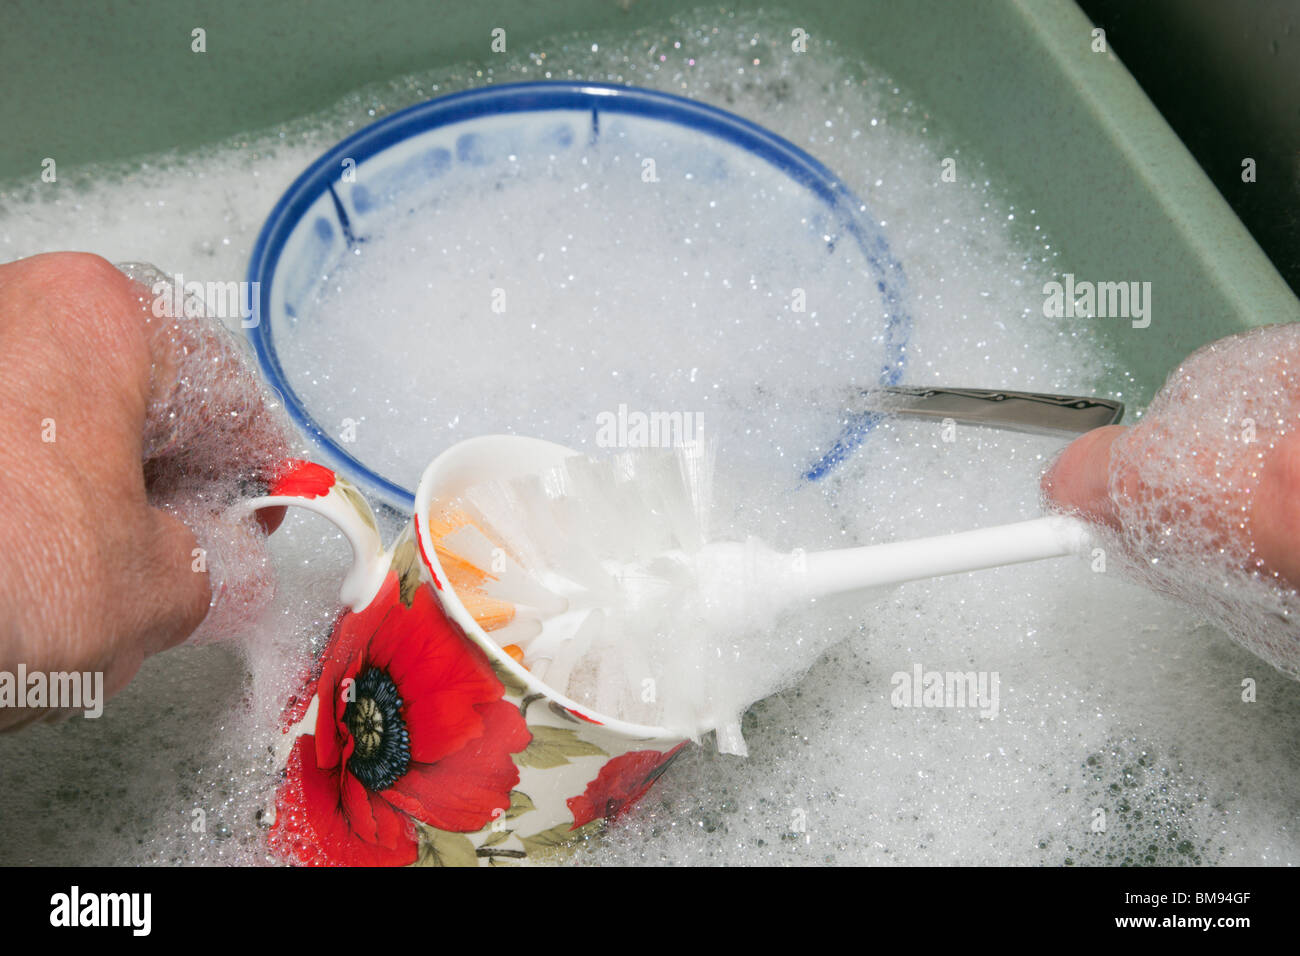 Person washing up by hand using a brush with soap suds in a washing up bowl of water. Stock Photo